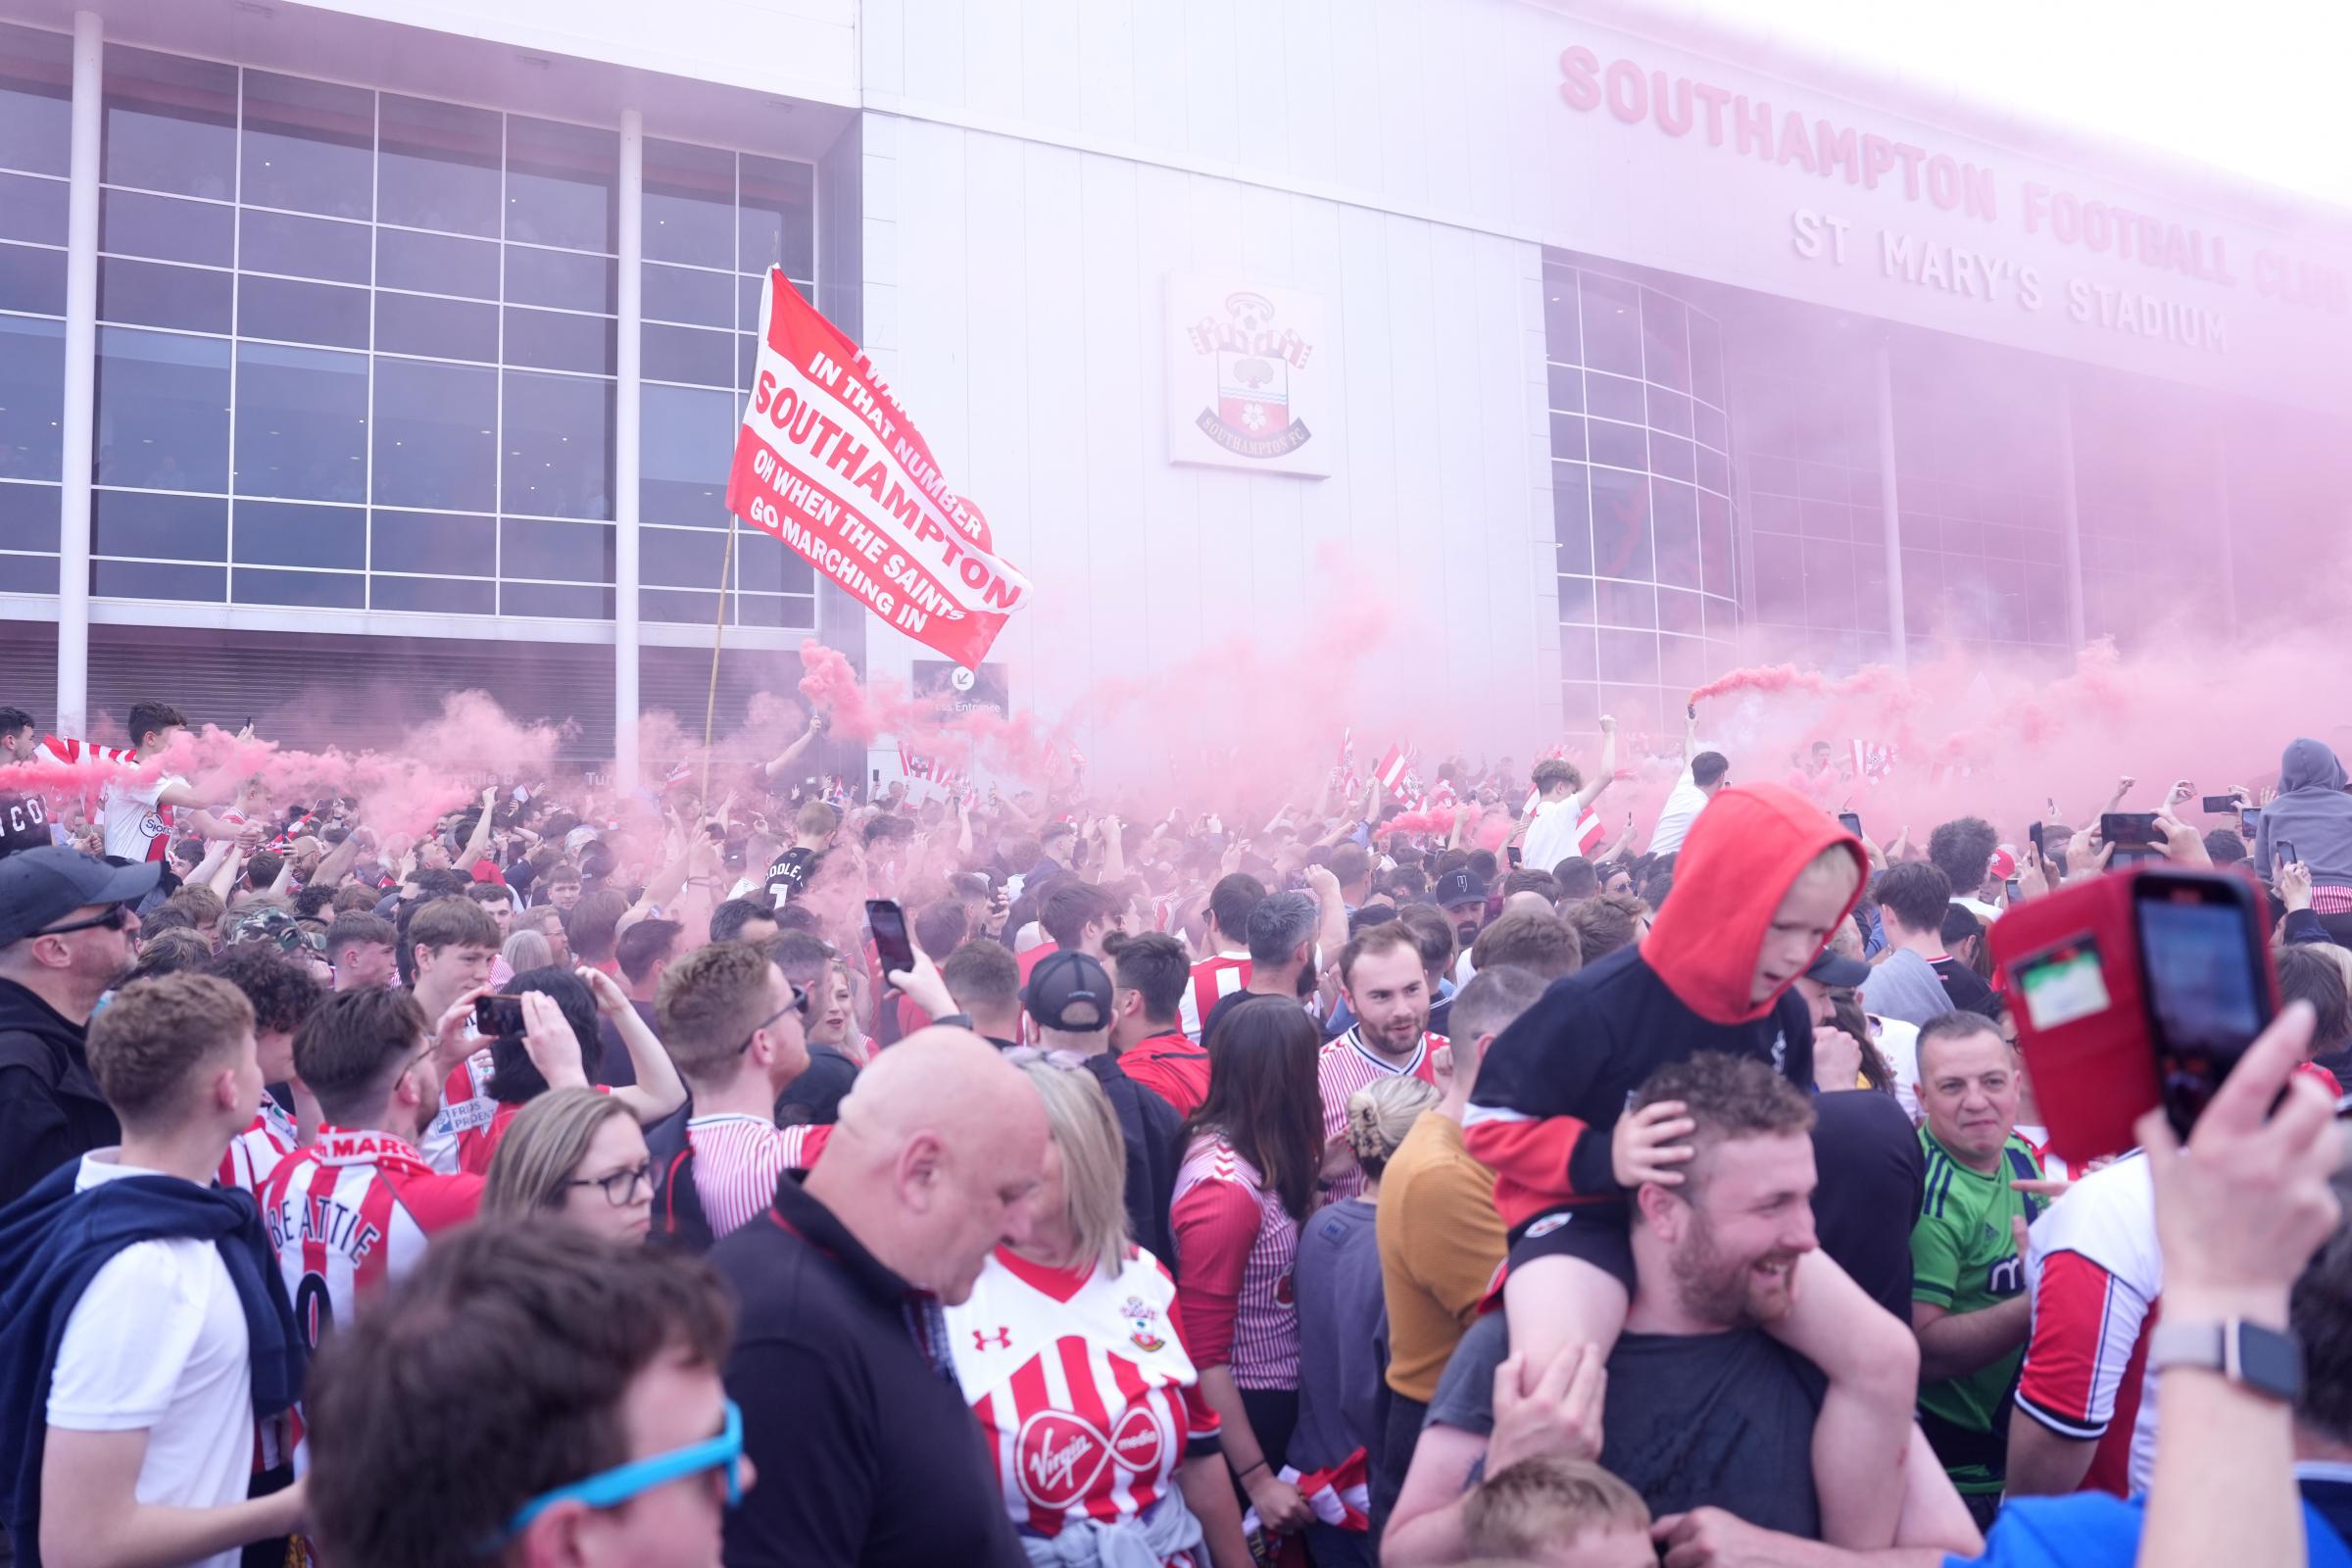 Southampton FC selling tickets to watch playoff final at St Mary's